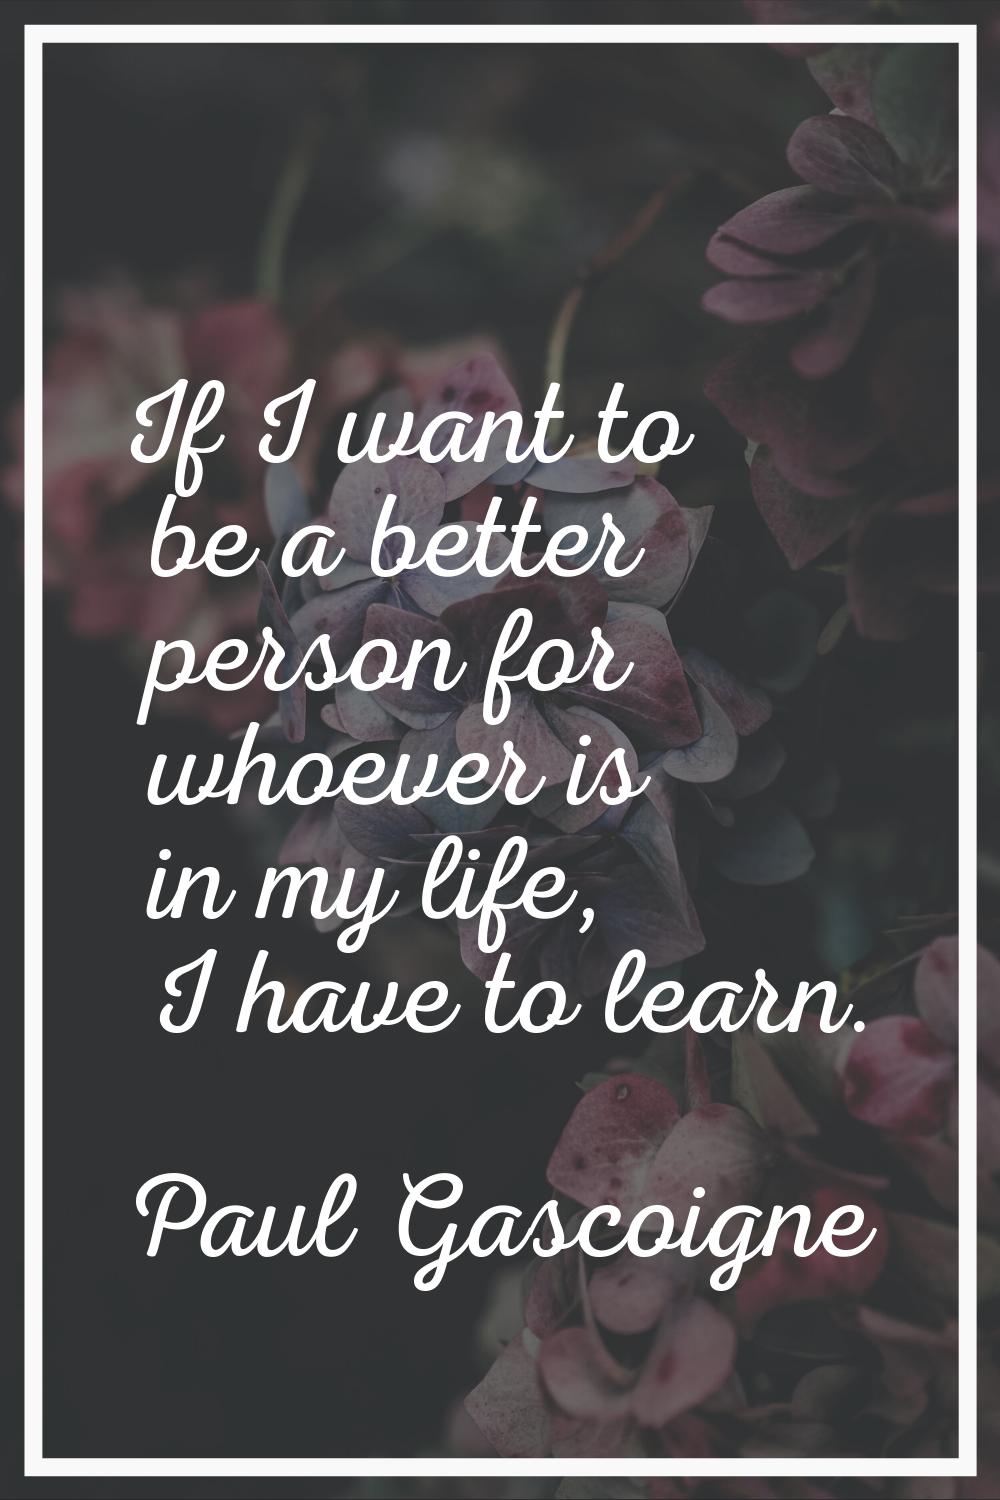 If I want to be a better person for whoever is in my life, I have to learn.